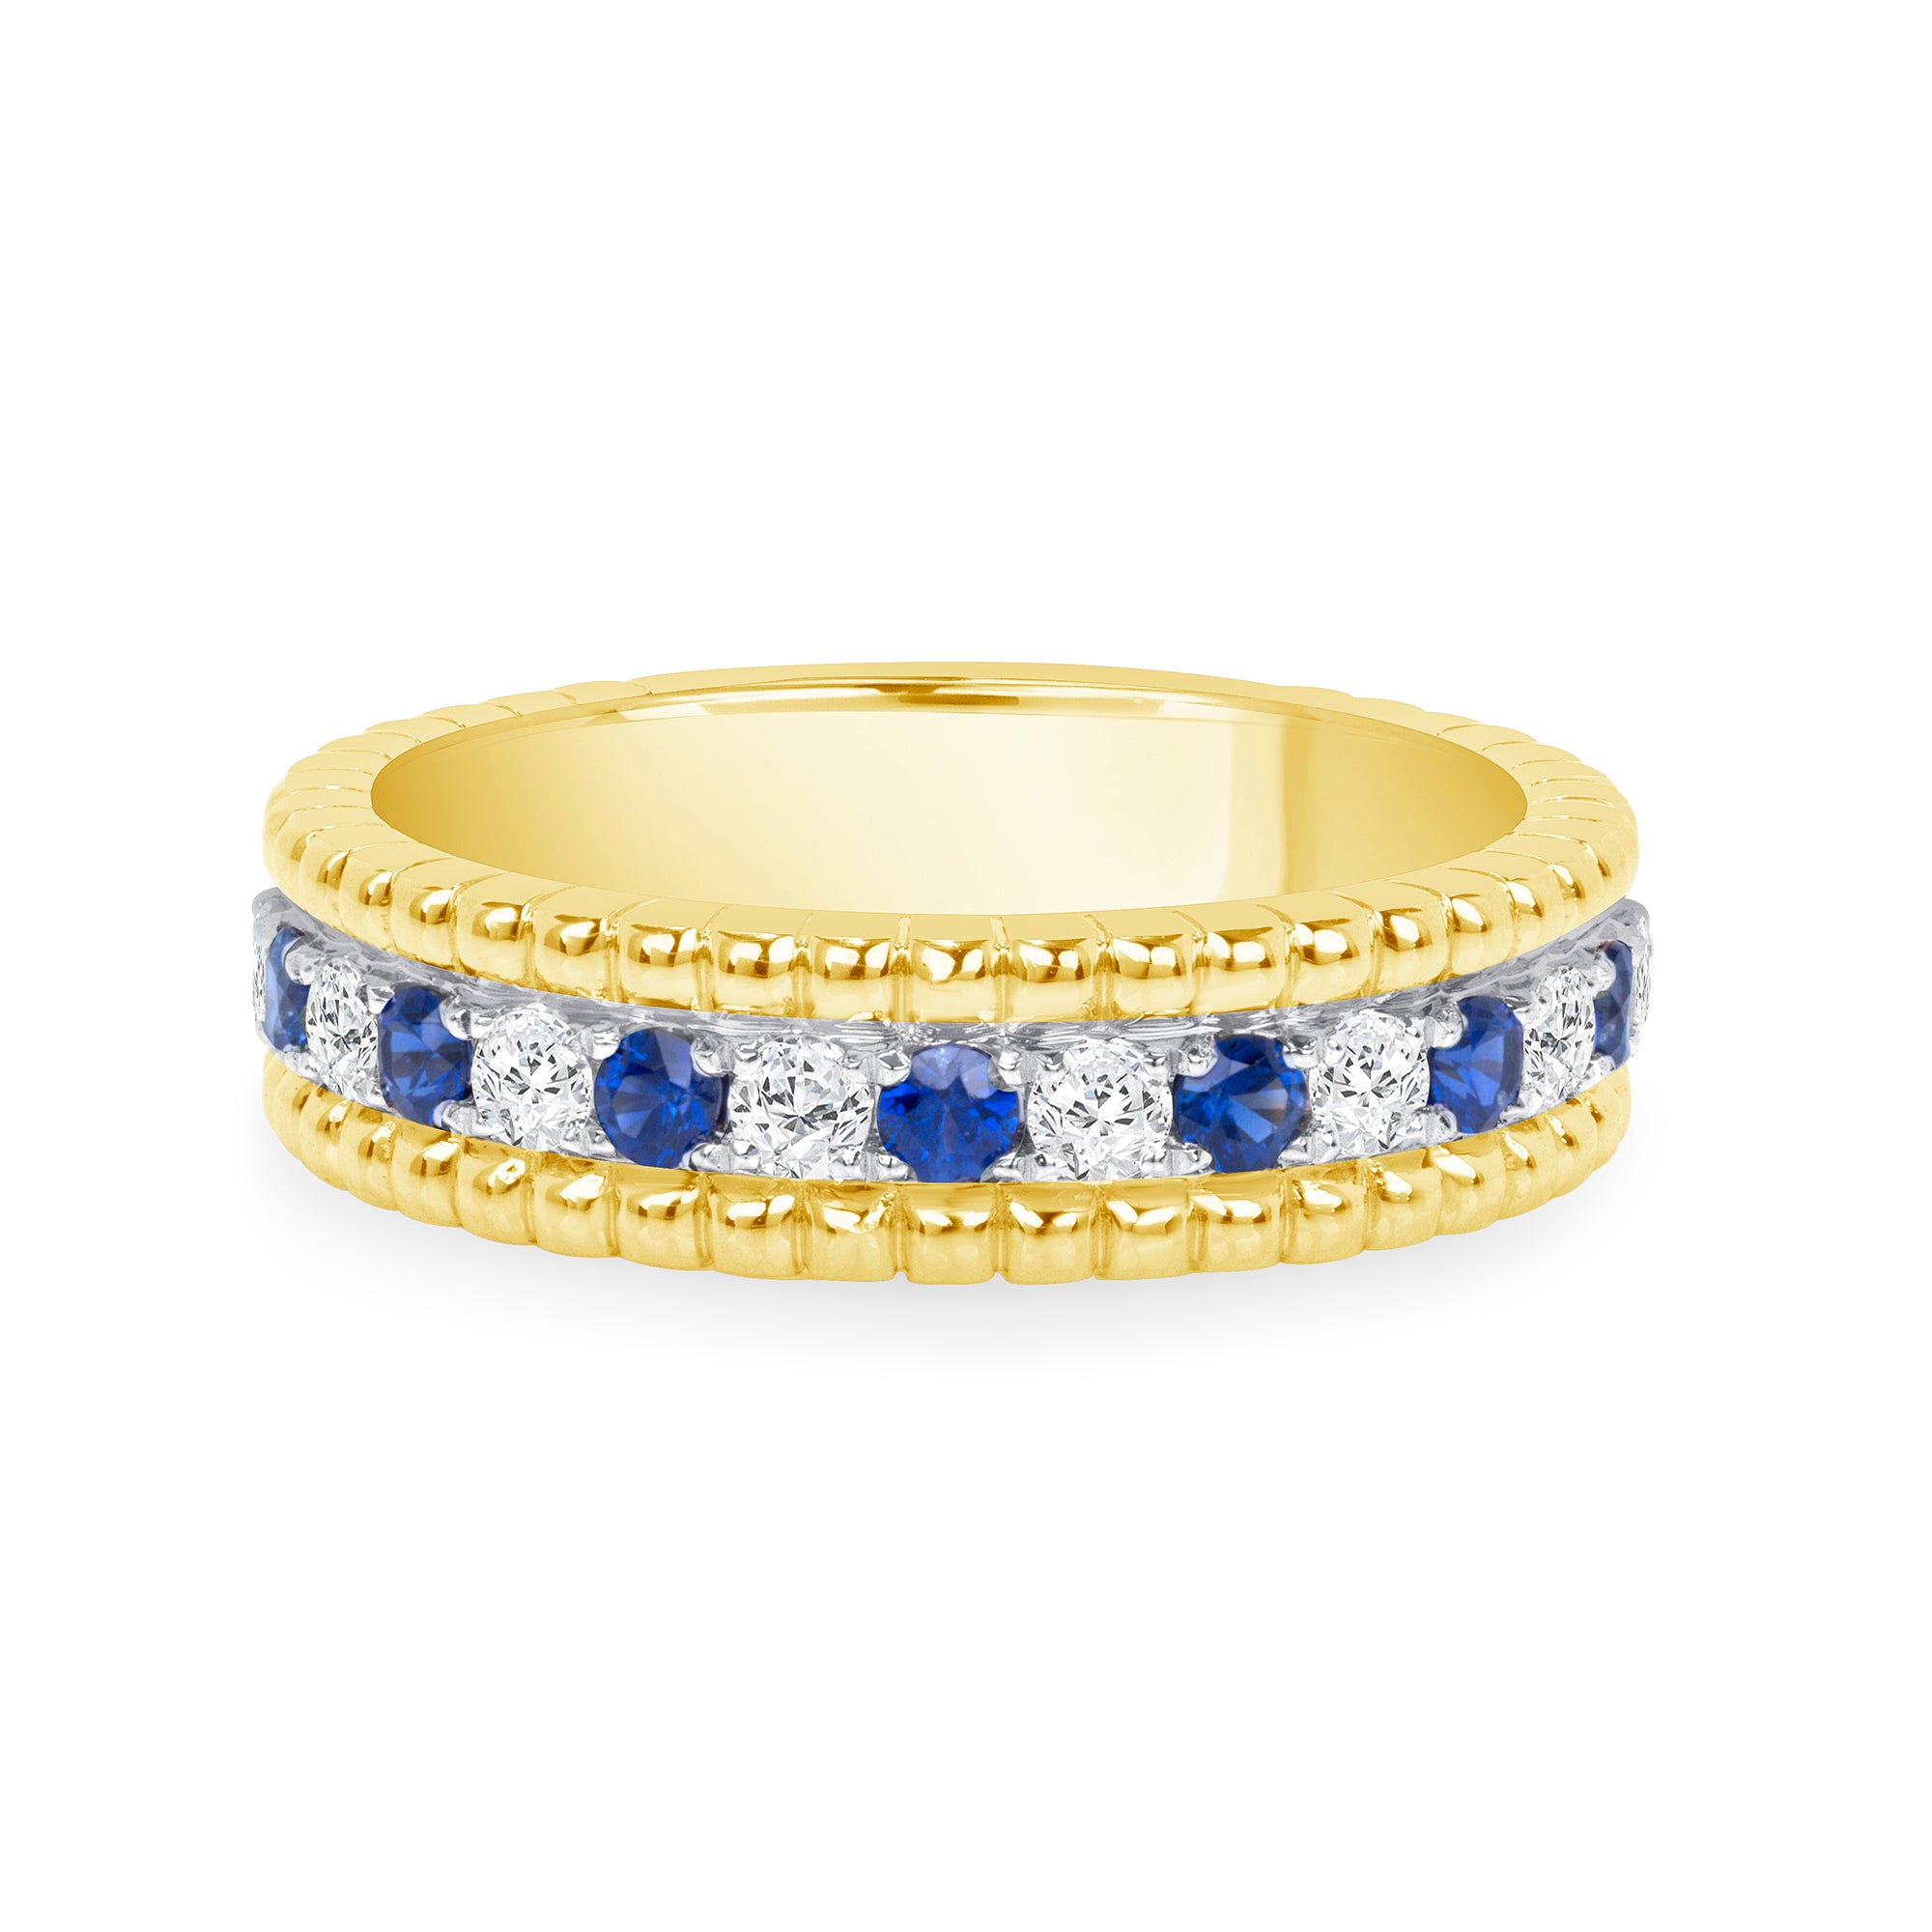 Alternating Round Brilliant Diamond and Sapphire Band in 18K Yellow Gold